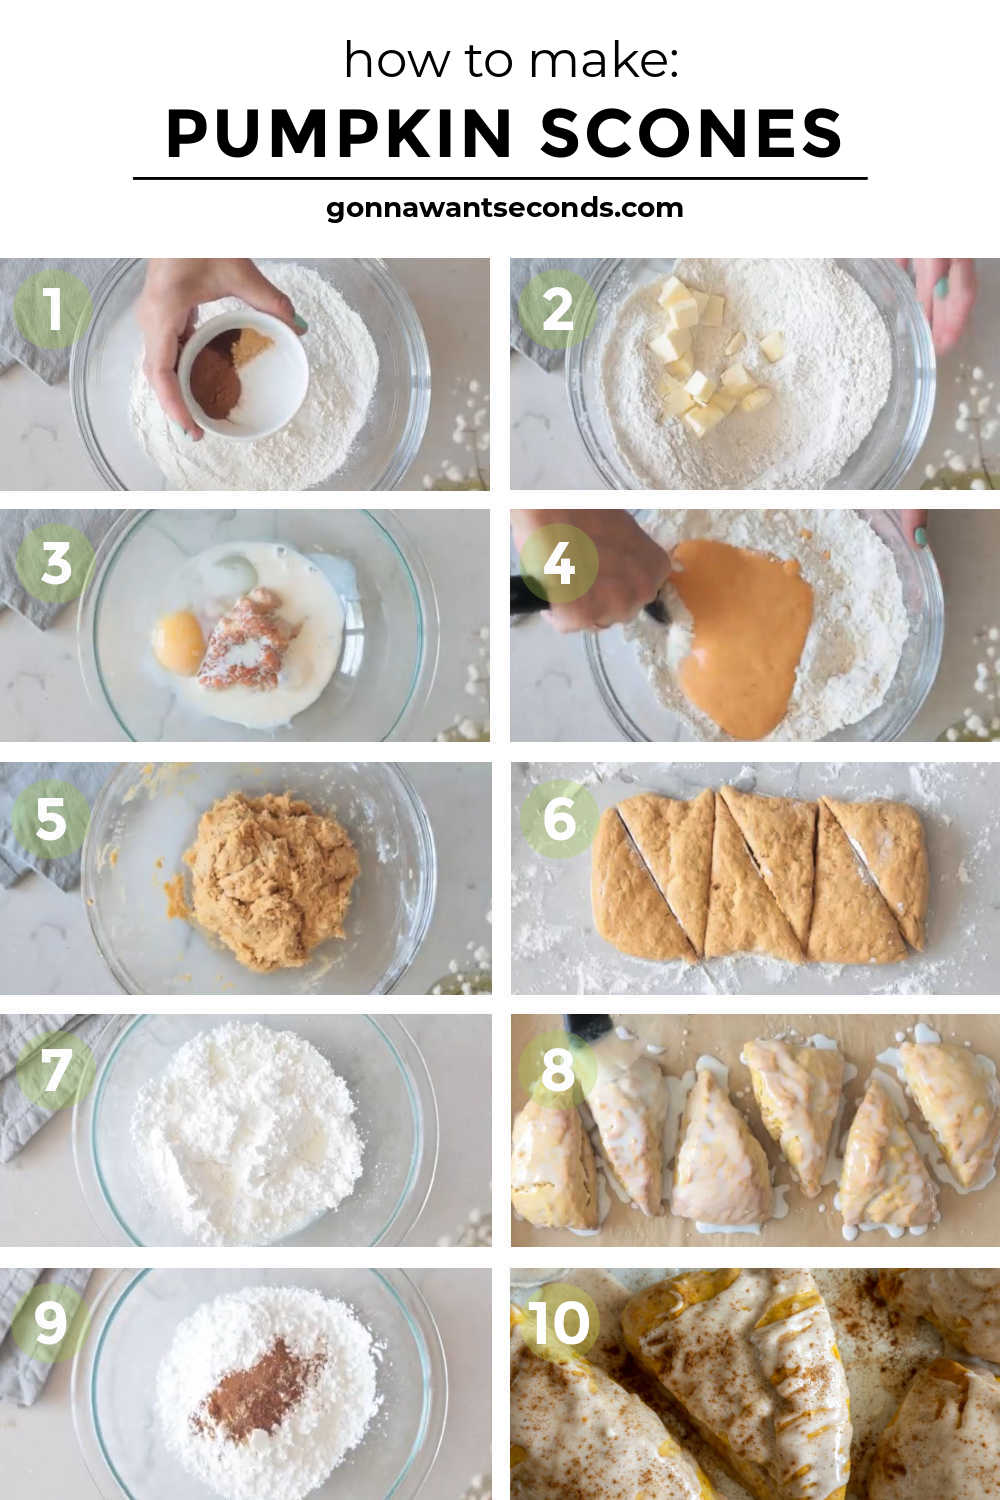 Step by step how to make pumpkin scones